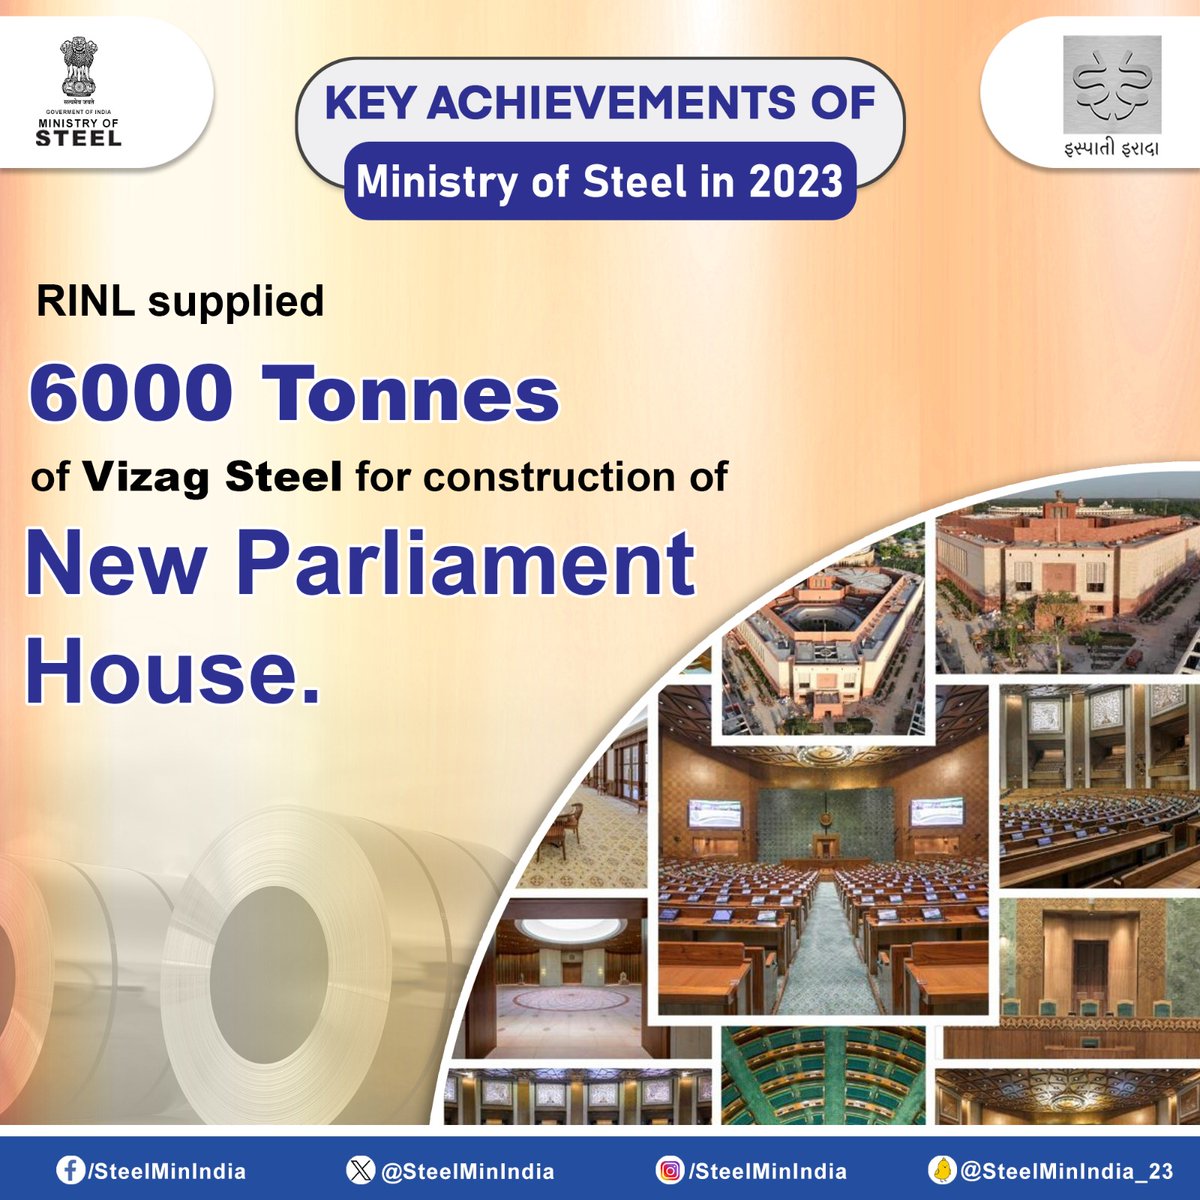 Building Strength for the Nation!💪

#RINL's contribution of 6000 tonnes of #VizagSteel to the construction of the #NewParliamentHouse stands tall among the #KeyAchievements of the #MinistryofSteel in 2023.🏛️🇮🇳

#ViksitBharatSankalpYatra #HamaraSankalpViksitBharat